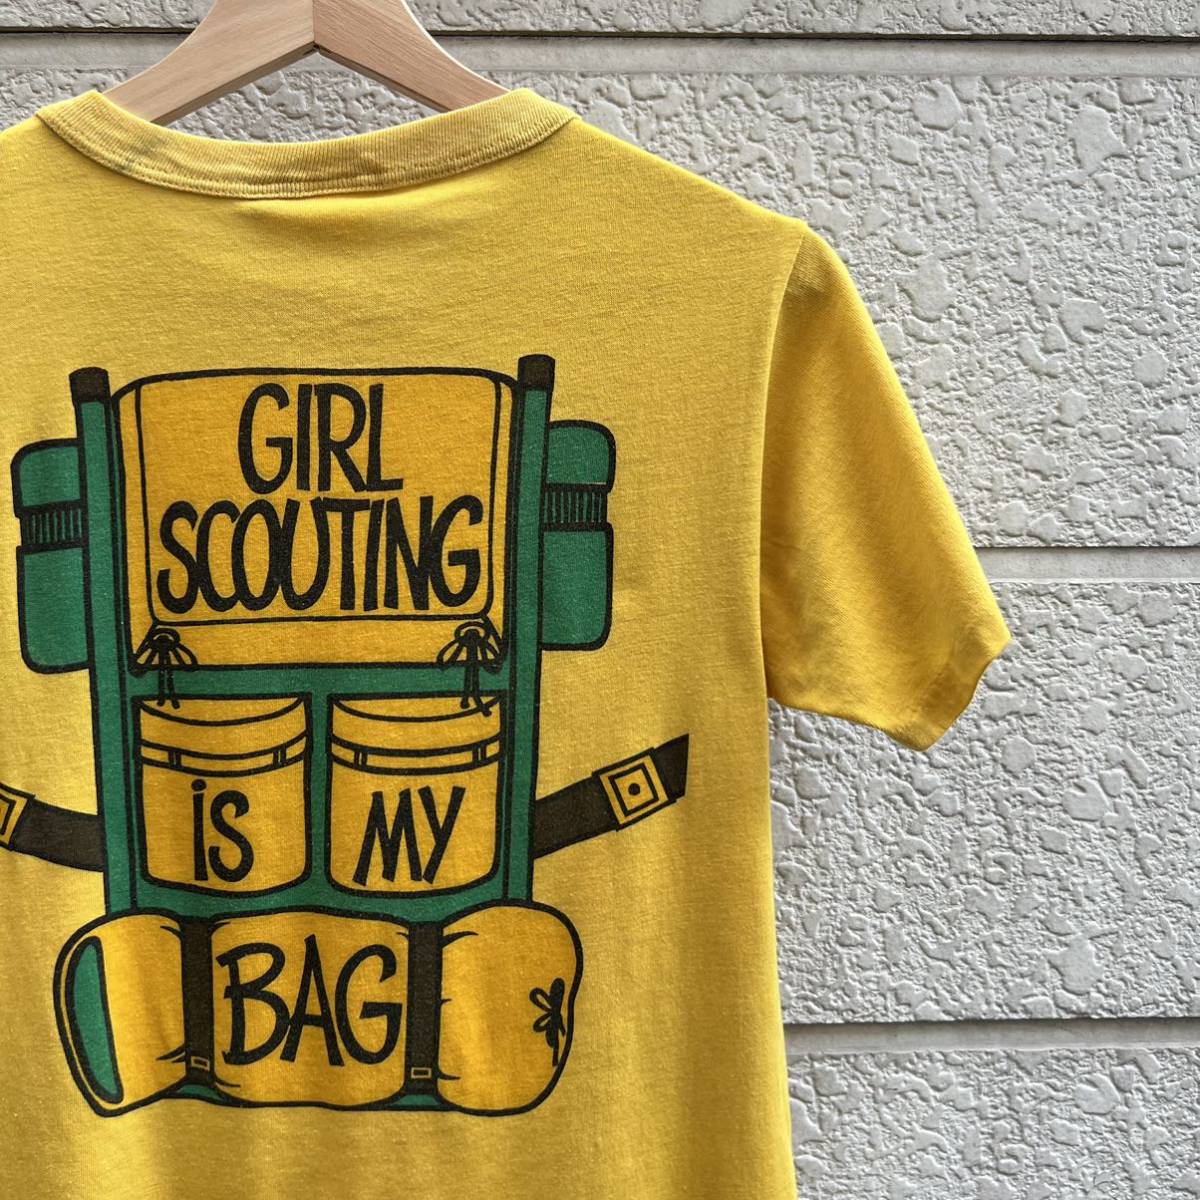 70s 80s USA古着 黄色 プリントTシャツ バックプリント 半袖Tシャツ GIRL SCOUTS ガールスカウト アメリカ古着 vintage ヴィンテージ